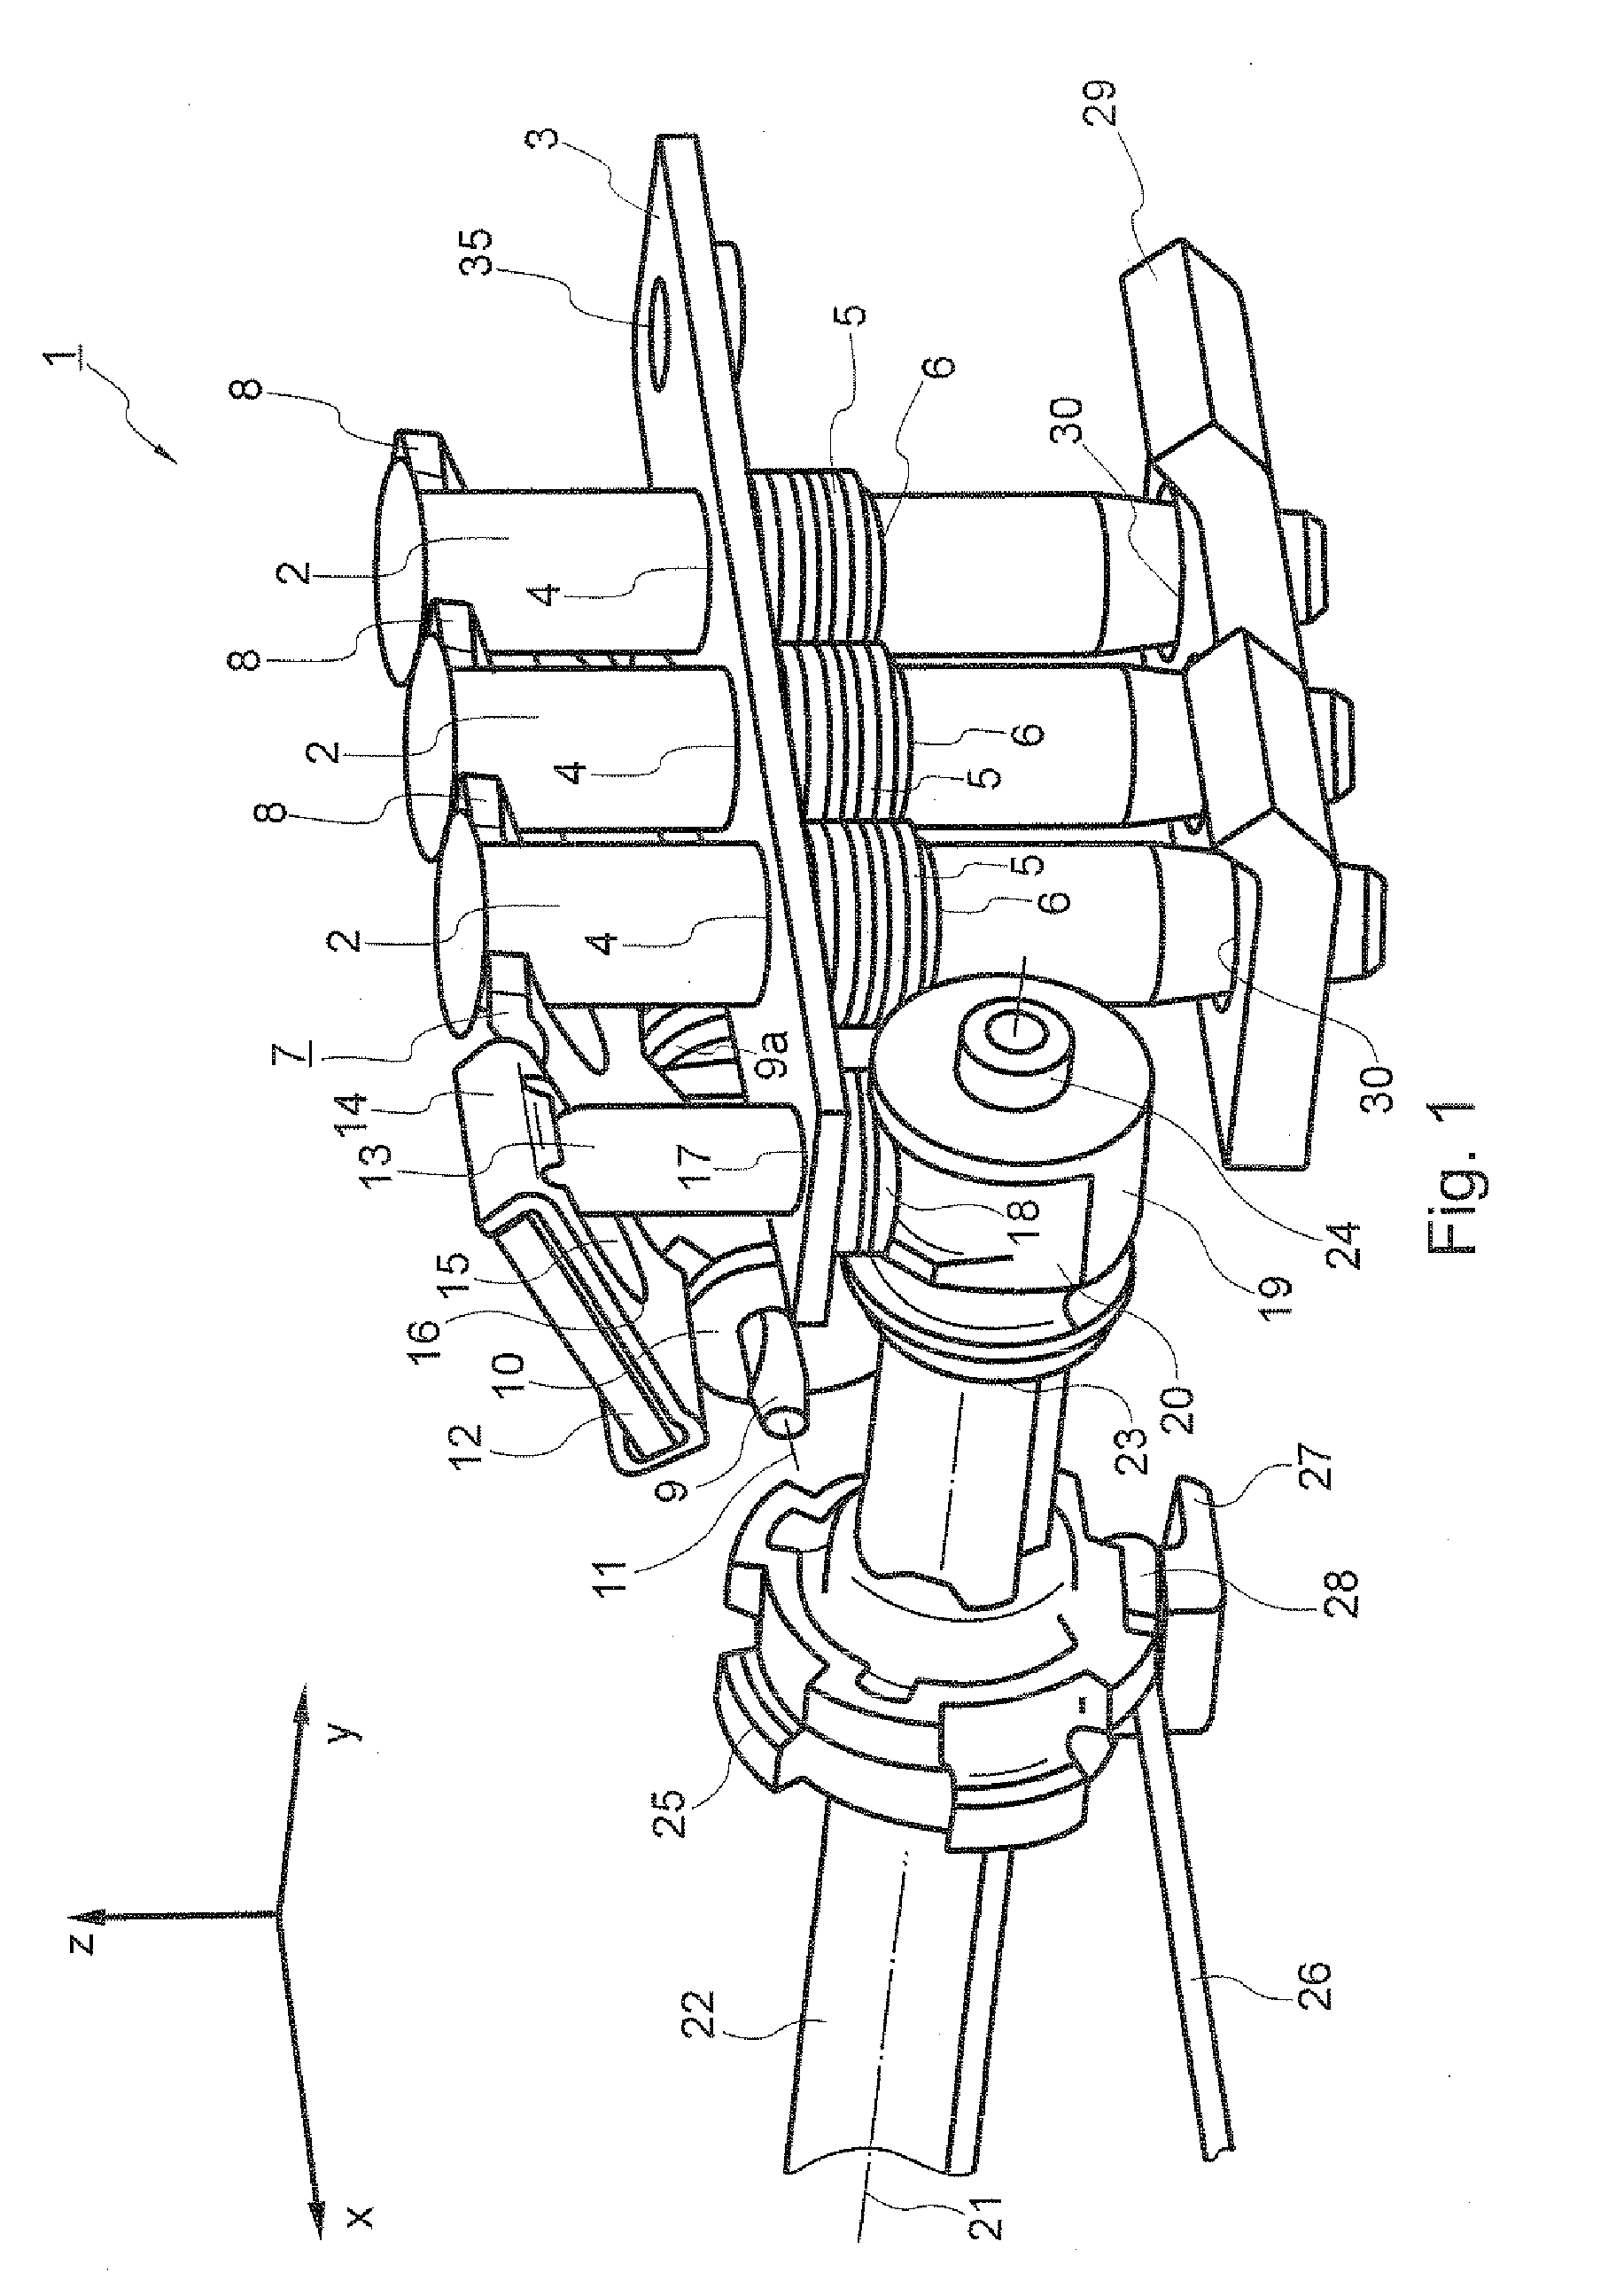 Locking Device for a Rail Adjustment System